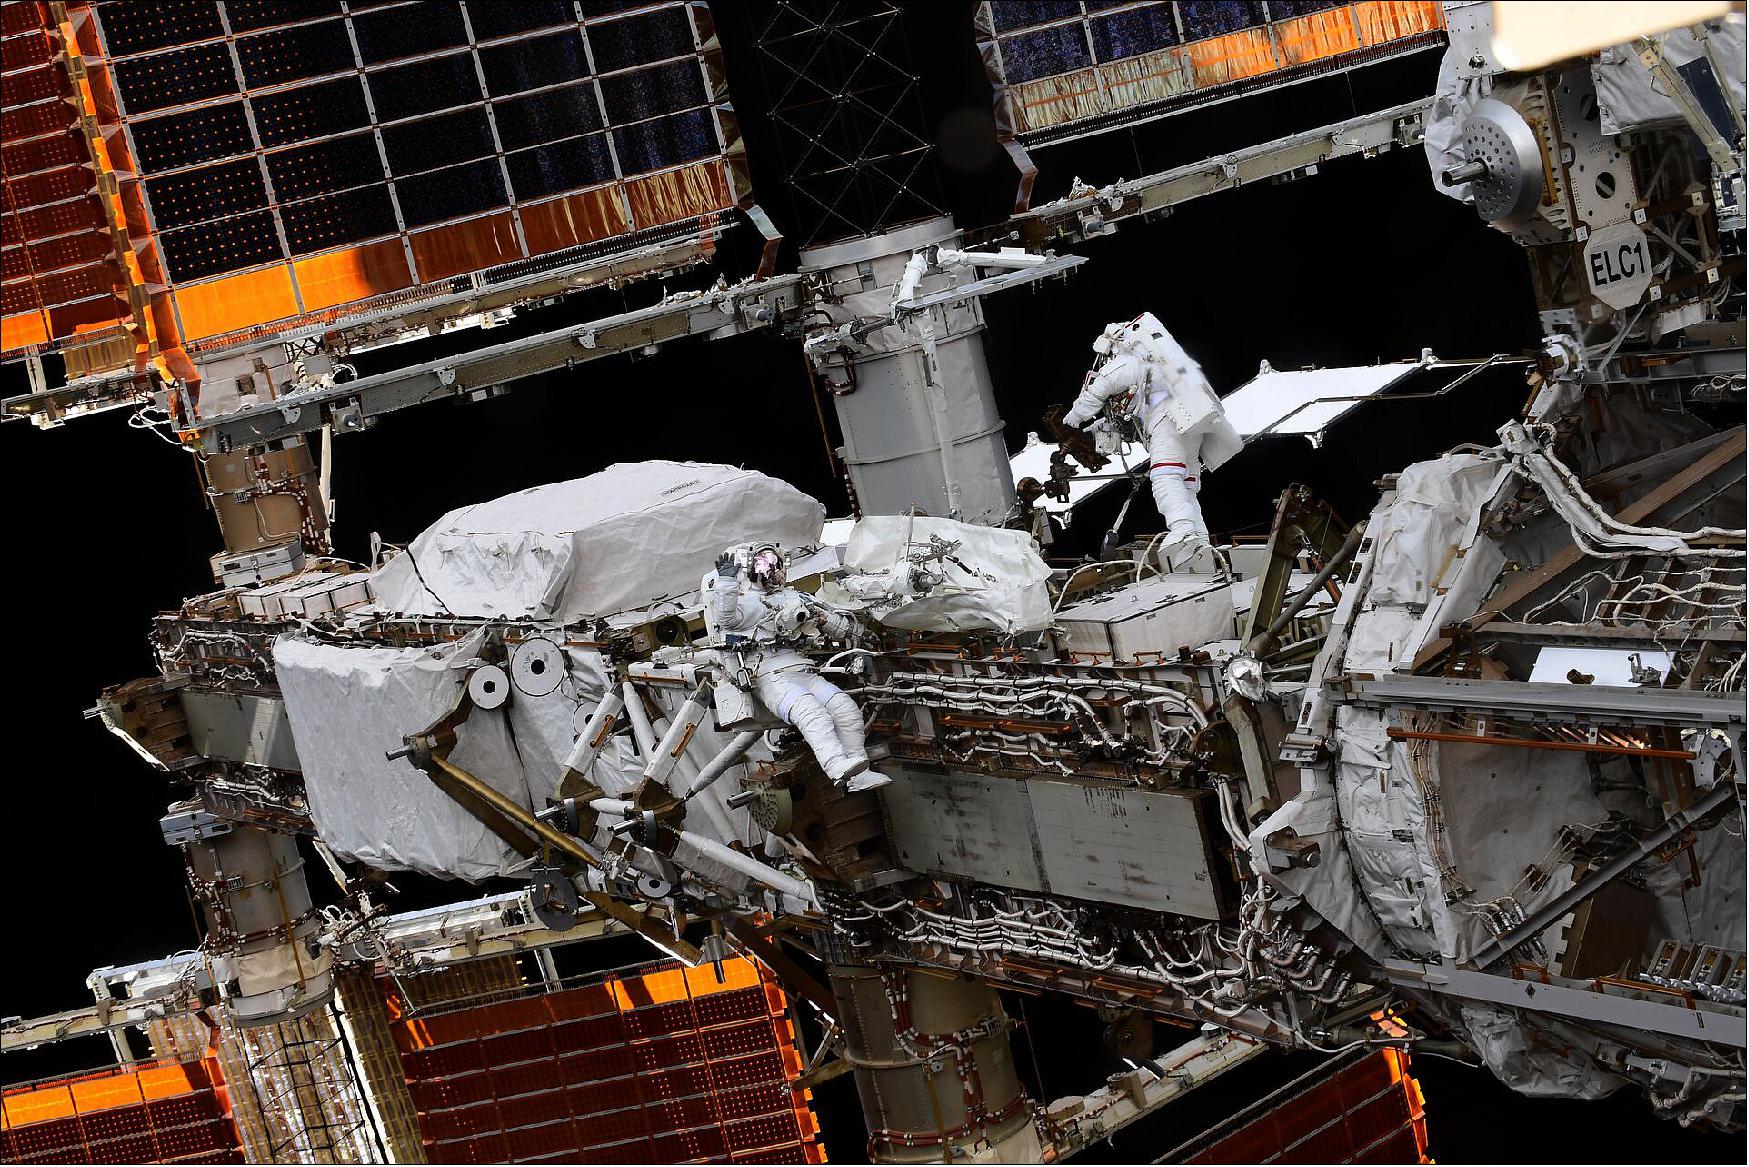 Figure 41: As this image shows, the International Space Station is a huge, complex spacecraft. Built by international partners and in operation for over 20 years now, the only human outpost in space (so far!) is a sight to behold and requires spacewalks to maintain. - But as Thomas notes, fixing up the Space Station is not just a maintenance job, it is also "improving the station and what it stands for." (image credit: NASA)